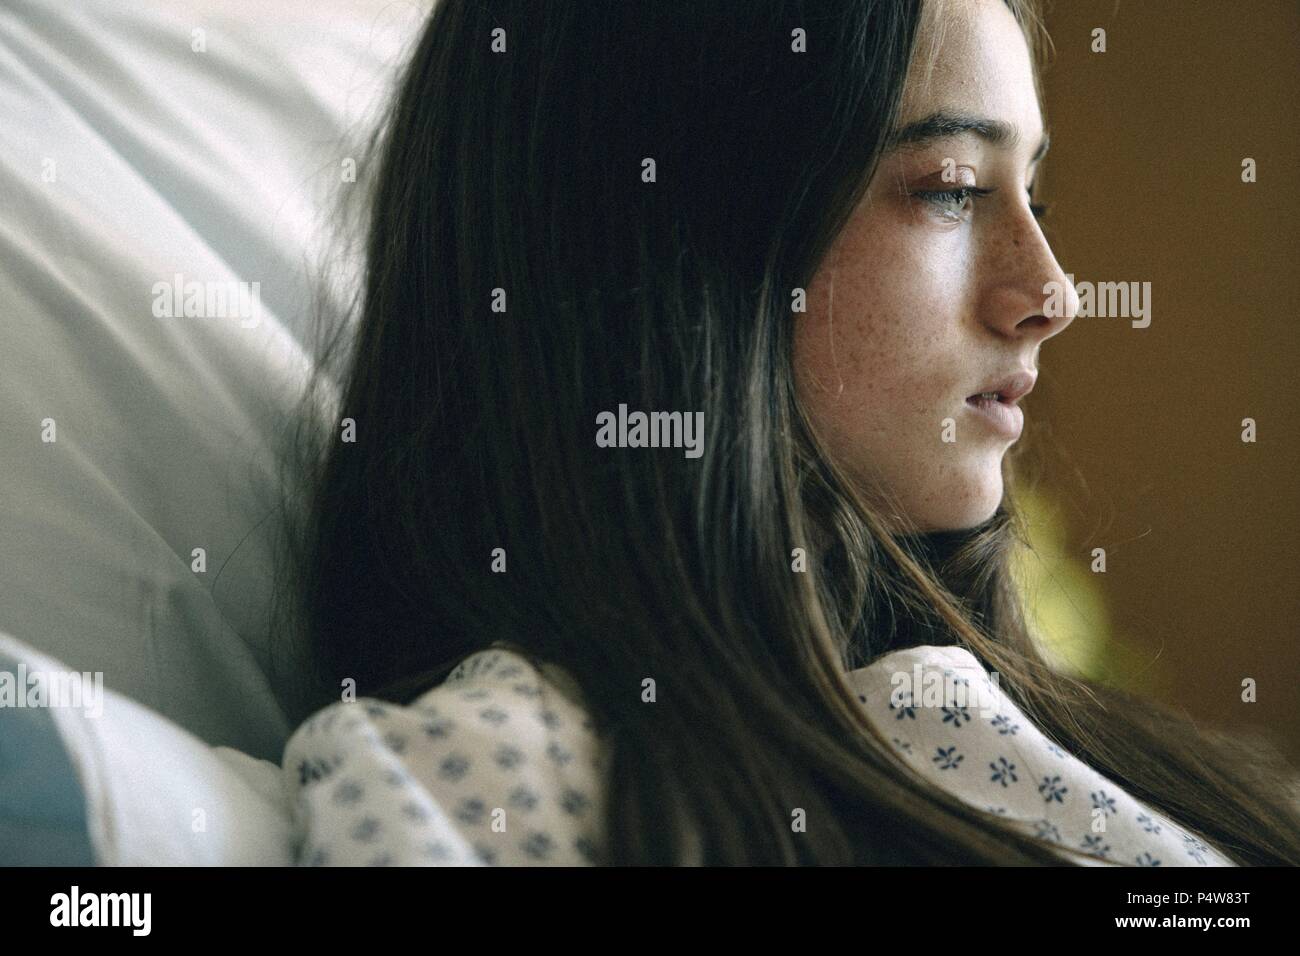 Original Film Title: THE KILLING OF A SACRED DEER.  English Title: THE KILLING OF A SACRED DEER.  Film Director: YORGOS LANTHIMOS.  Year: 2017.  Stars: RAFFEY CASSIDY. Credit: ELEMENT PICTURES / Album Stock Photo